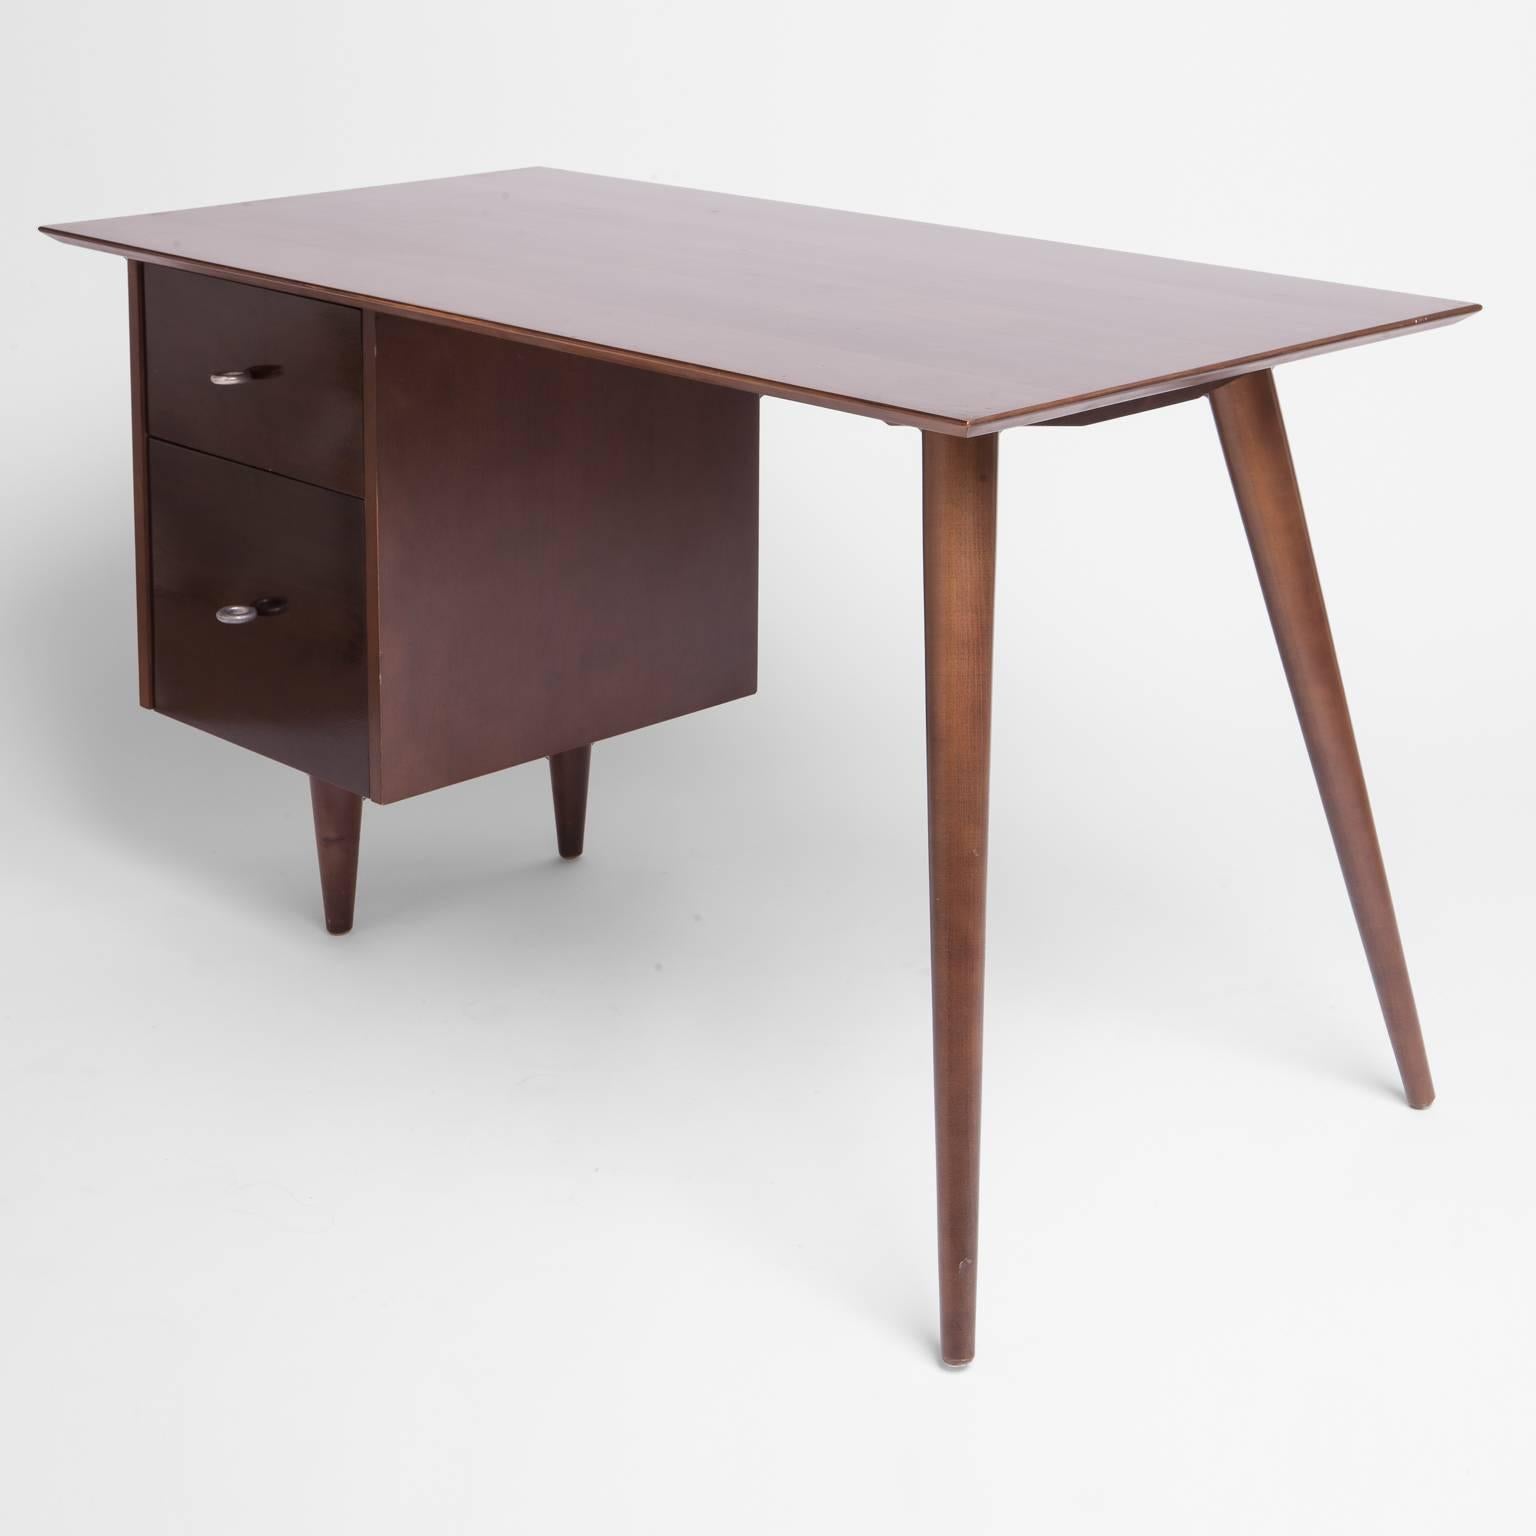 Dark mahogany stained, medium sized desk supported by two drawers to the left and the signature angular tapered legs on the right. There is ample knee space without a center drawer. The top drawer retains the Planner Group label, bottom drawer is